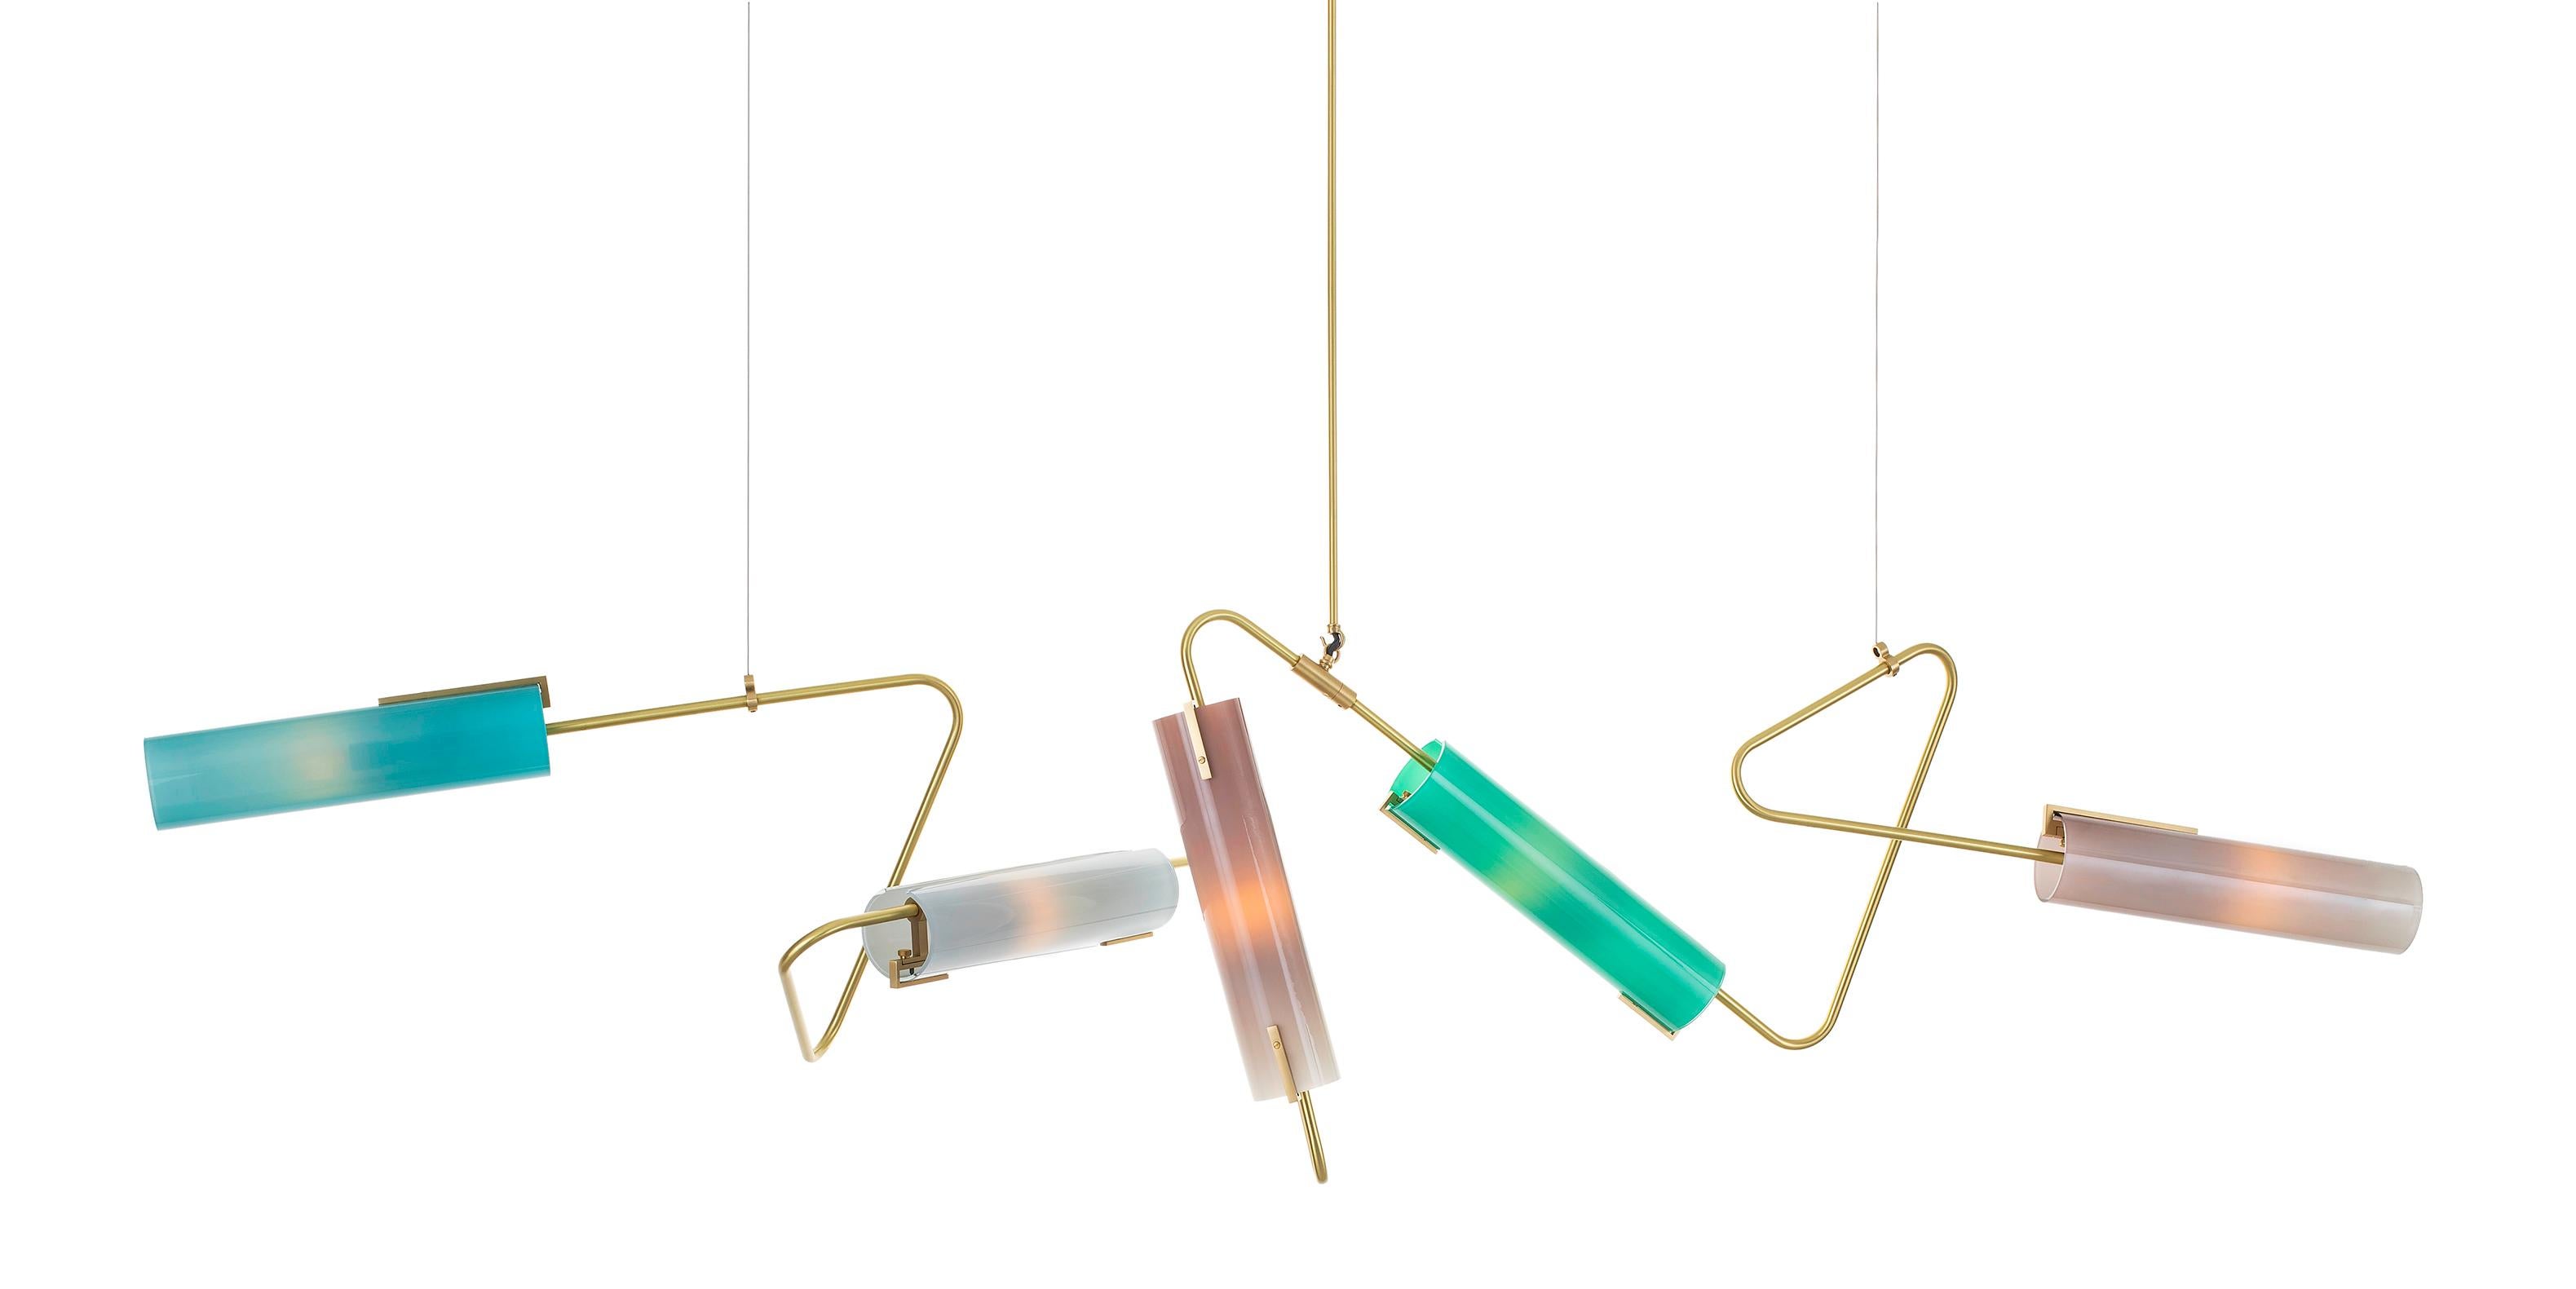 Continuum 64 Chandelier: Teal, Aqua, Olive, Sage Glass by Avram Rusu Studio In New Condition For Sale In Brooklyn, NY